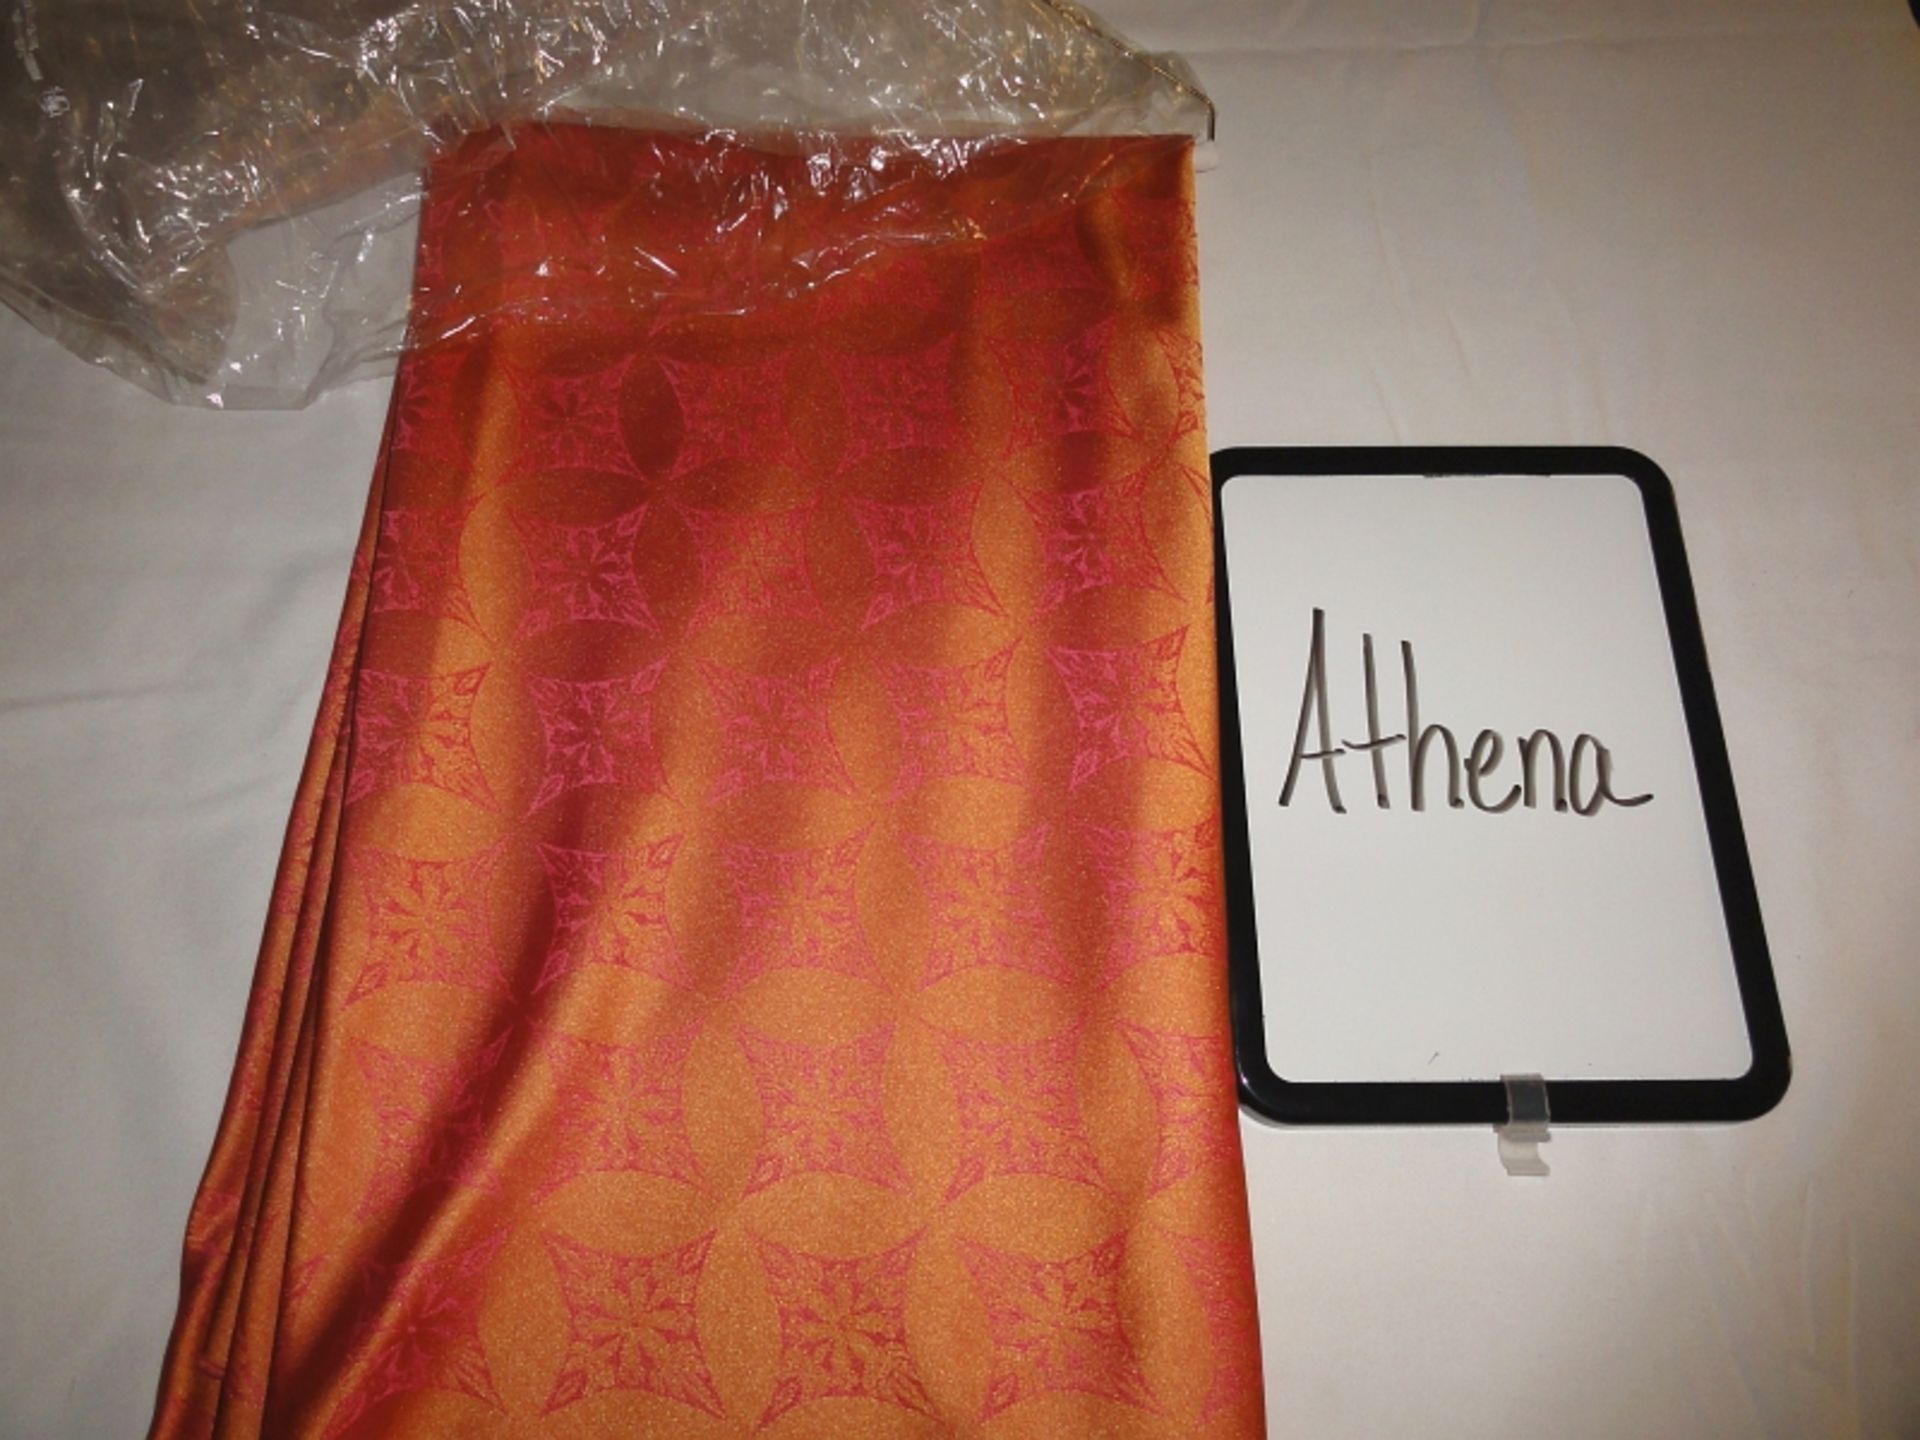 LINEN, ATHENA, Various Sizes including: